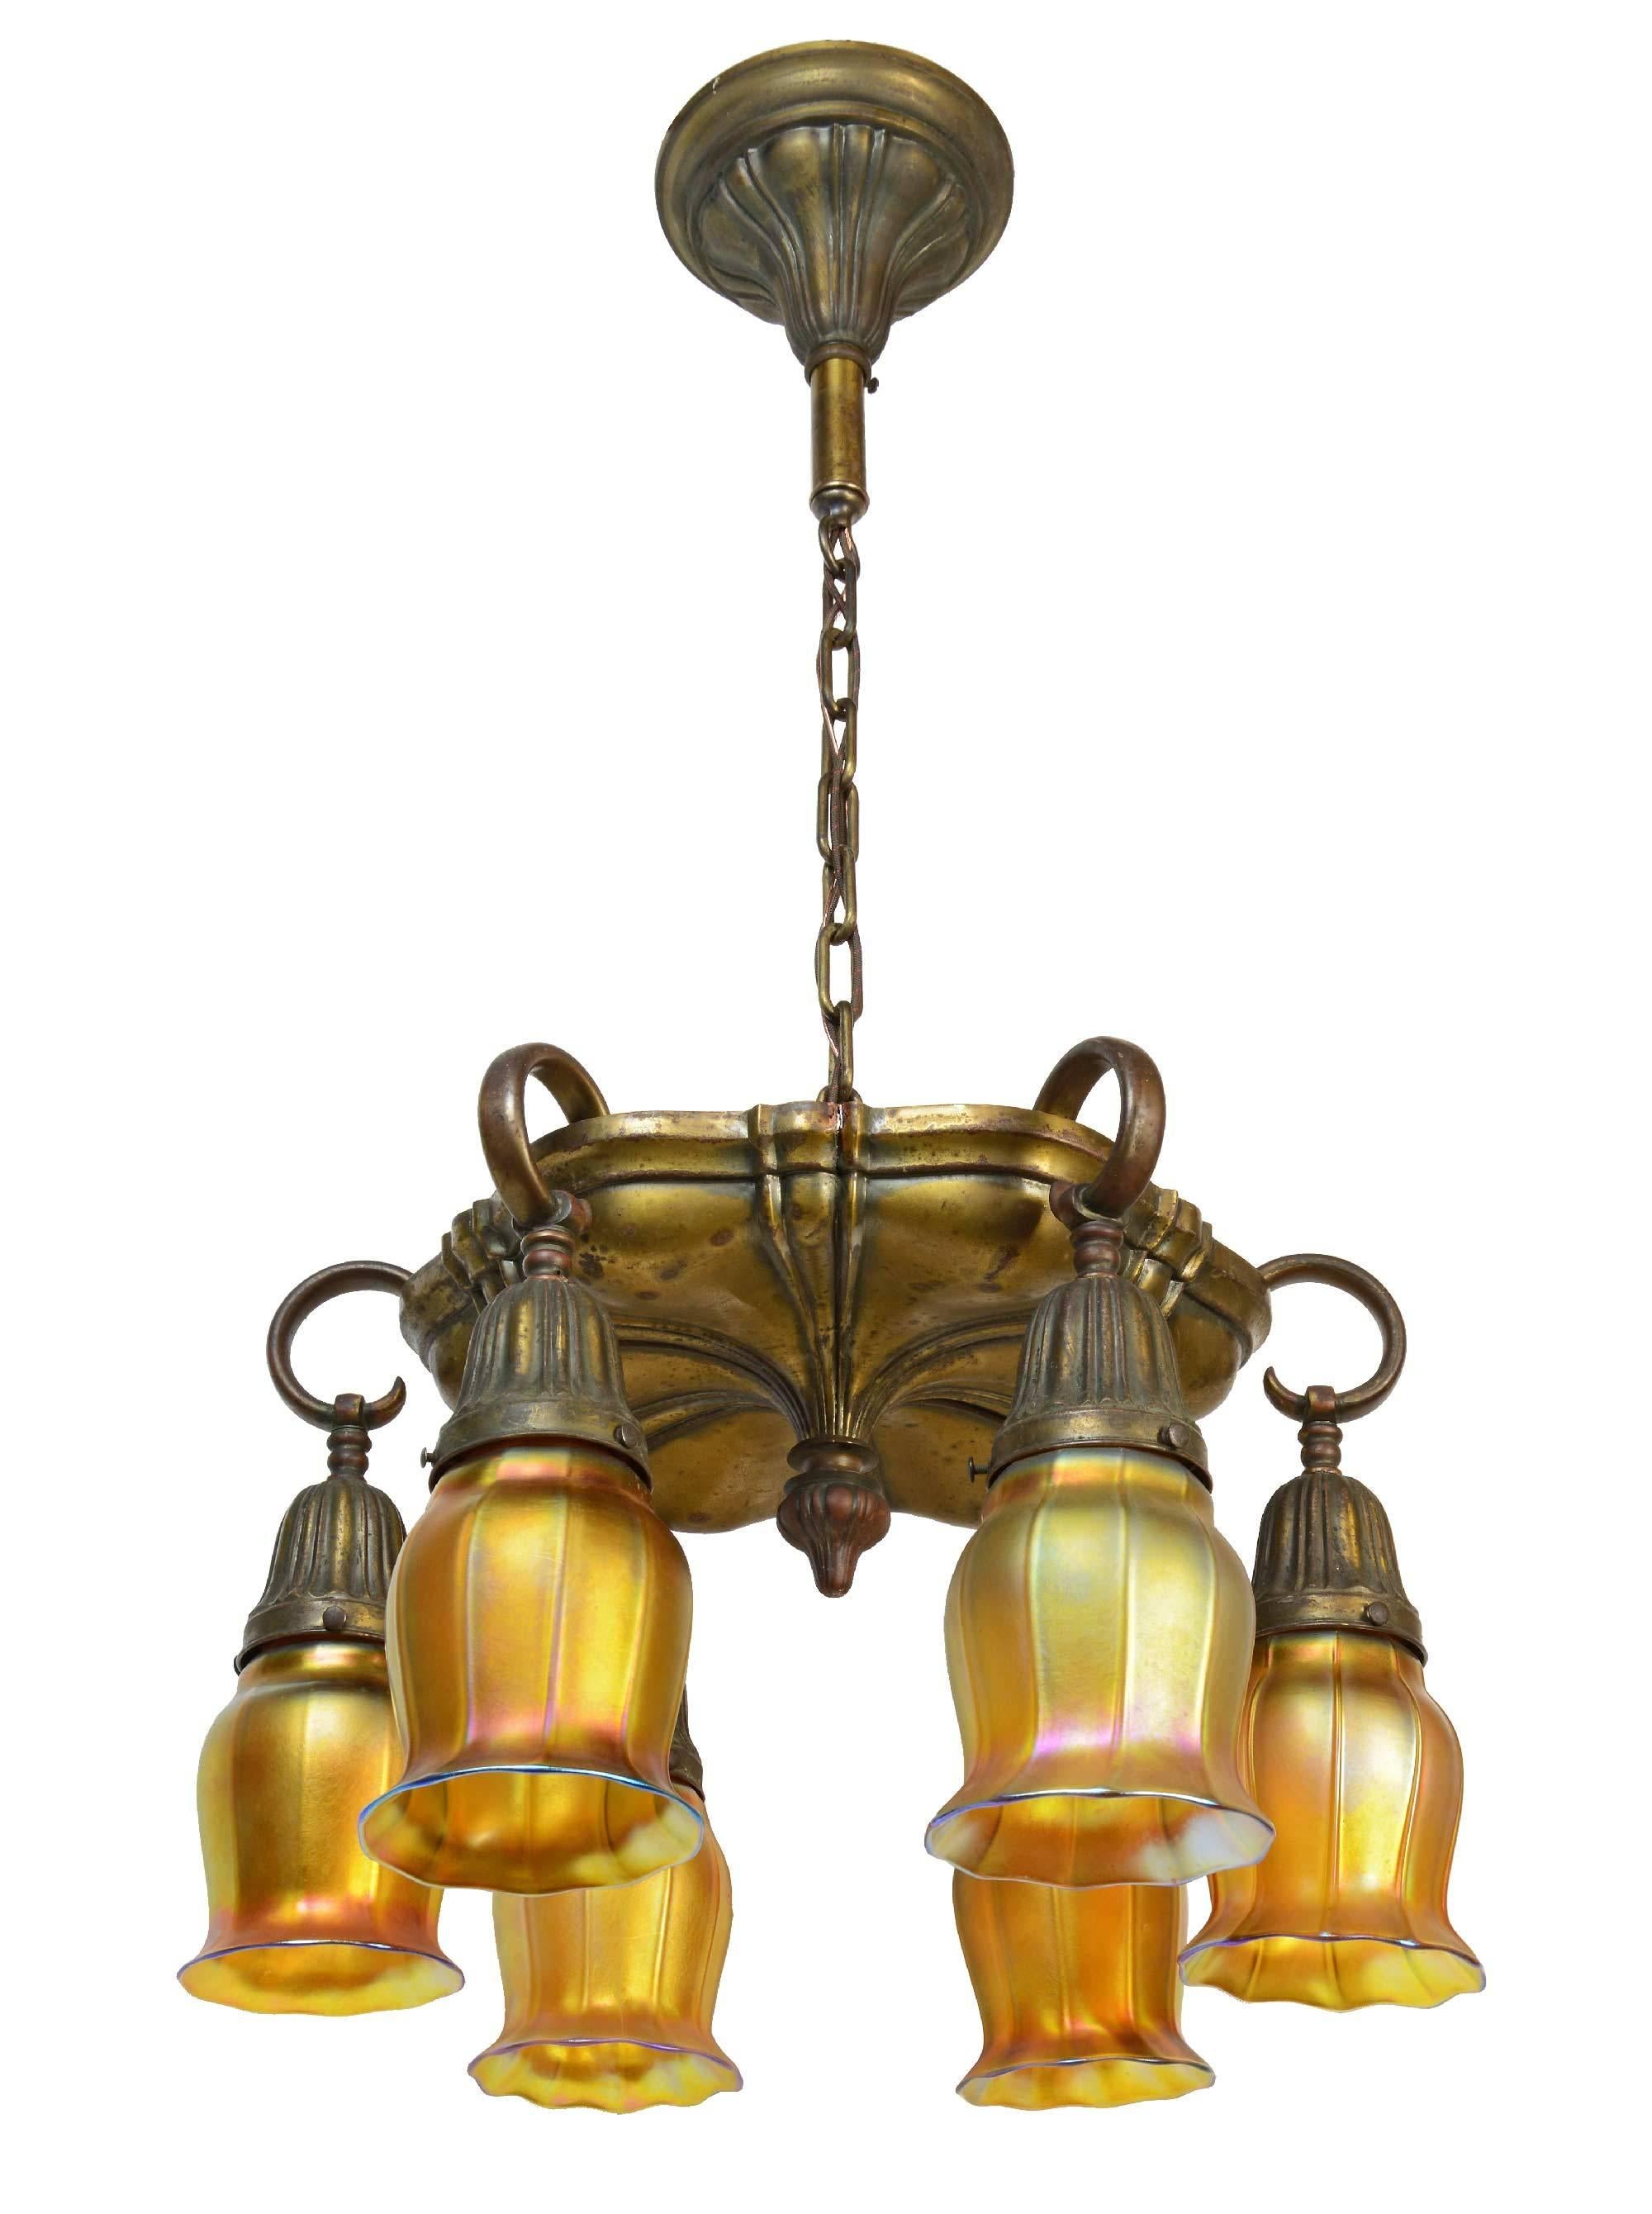 Brass Sheffield chandelier with six ring arms and beautiful iridescent gold Aurene art glass squash blossom shades, stamped Quezal.

Finish: Original.
Six medium sockets.
Fixture without shades: 16